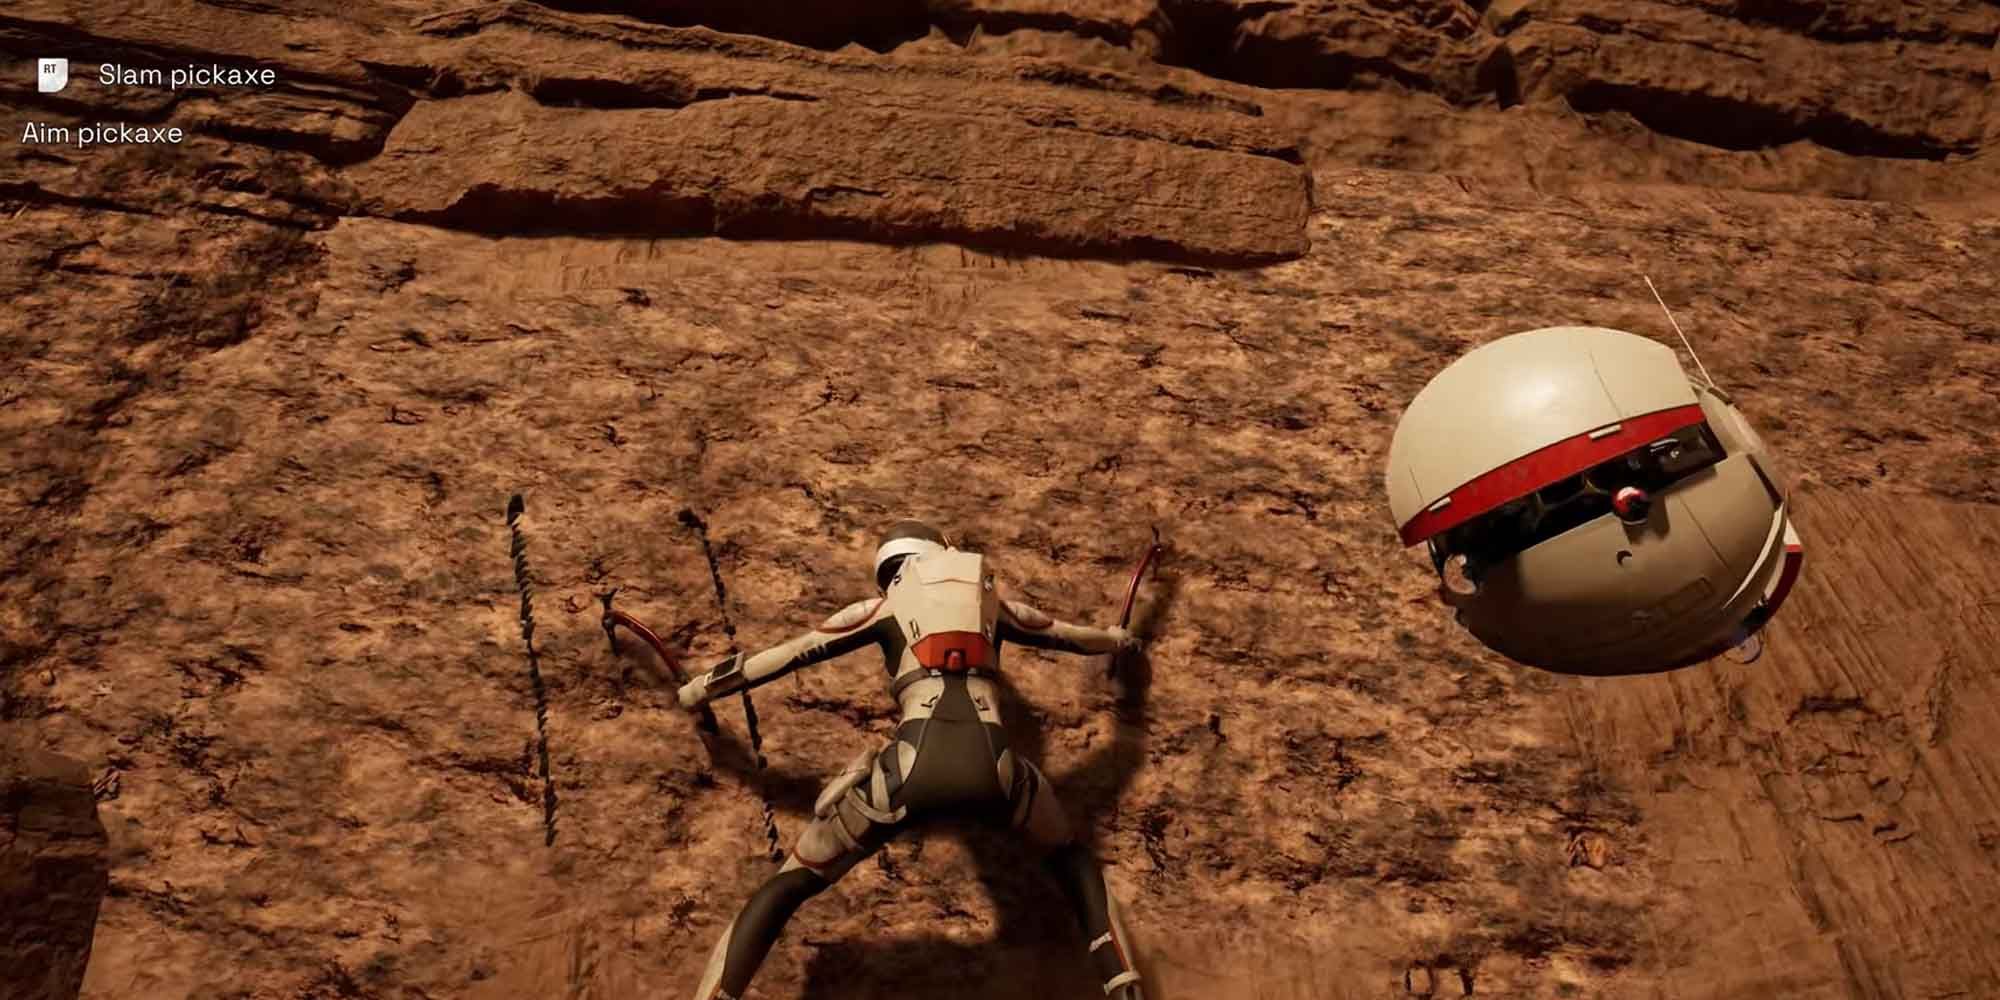 Rock Climbing on the surface of Mars in Deliver Us Mars